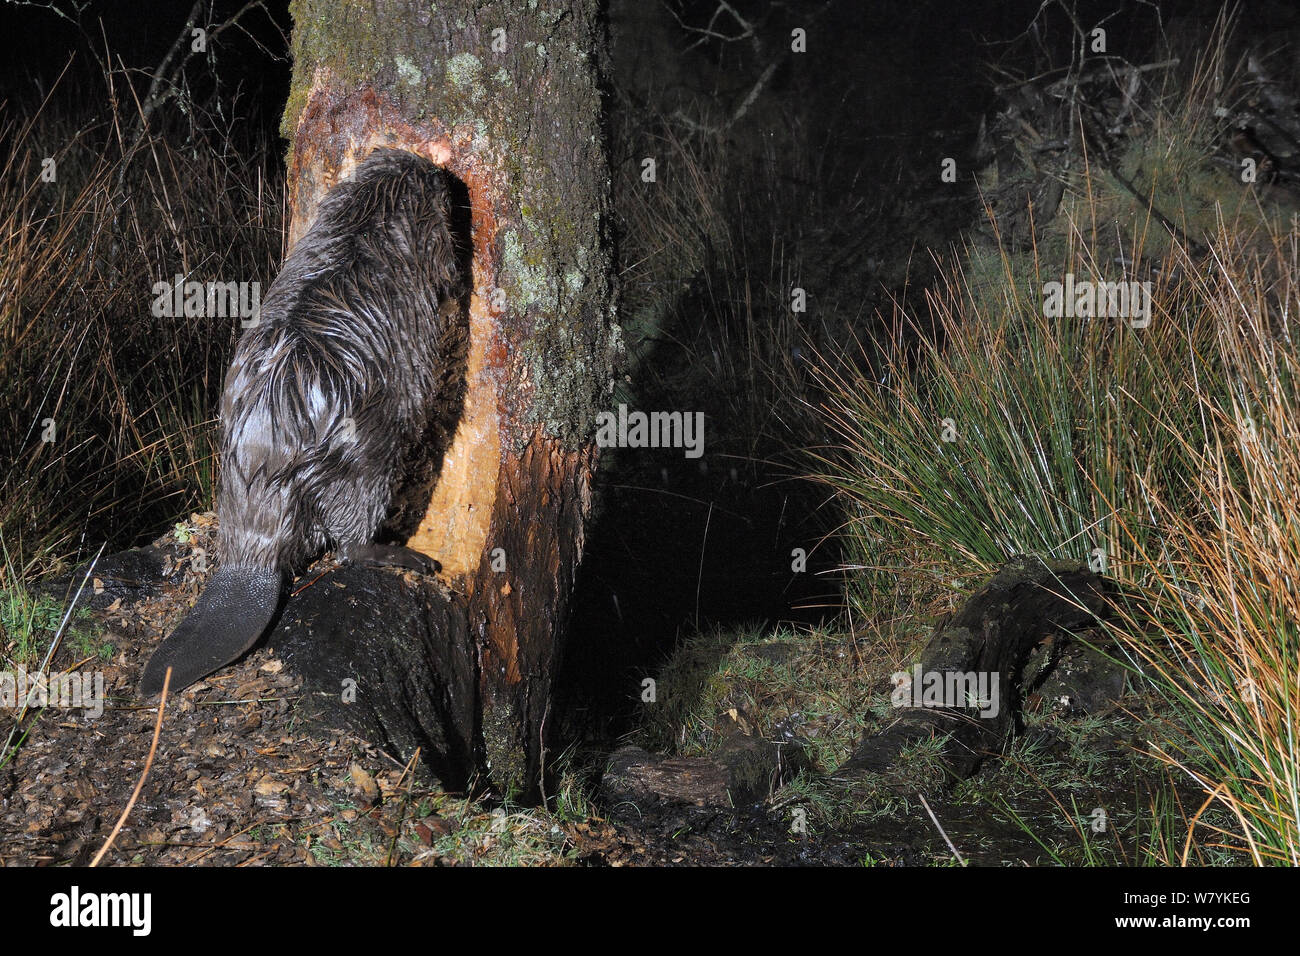 Eurasian beaver (Castor fiber) gnawing at tree in enclosure at night, with lodge in the background, Devon Beaver Project, run by Devon Wildlife Trust, Devon, UK, March. Taken by a remote camera trap. Stock Photo